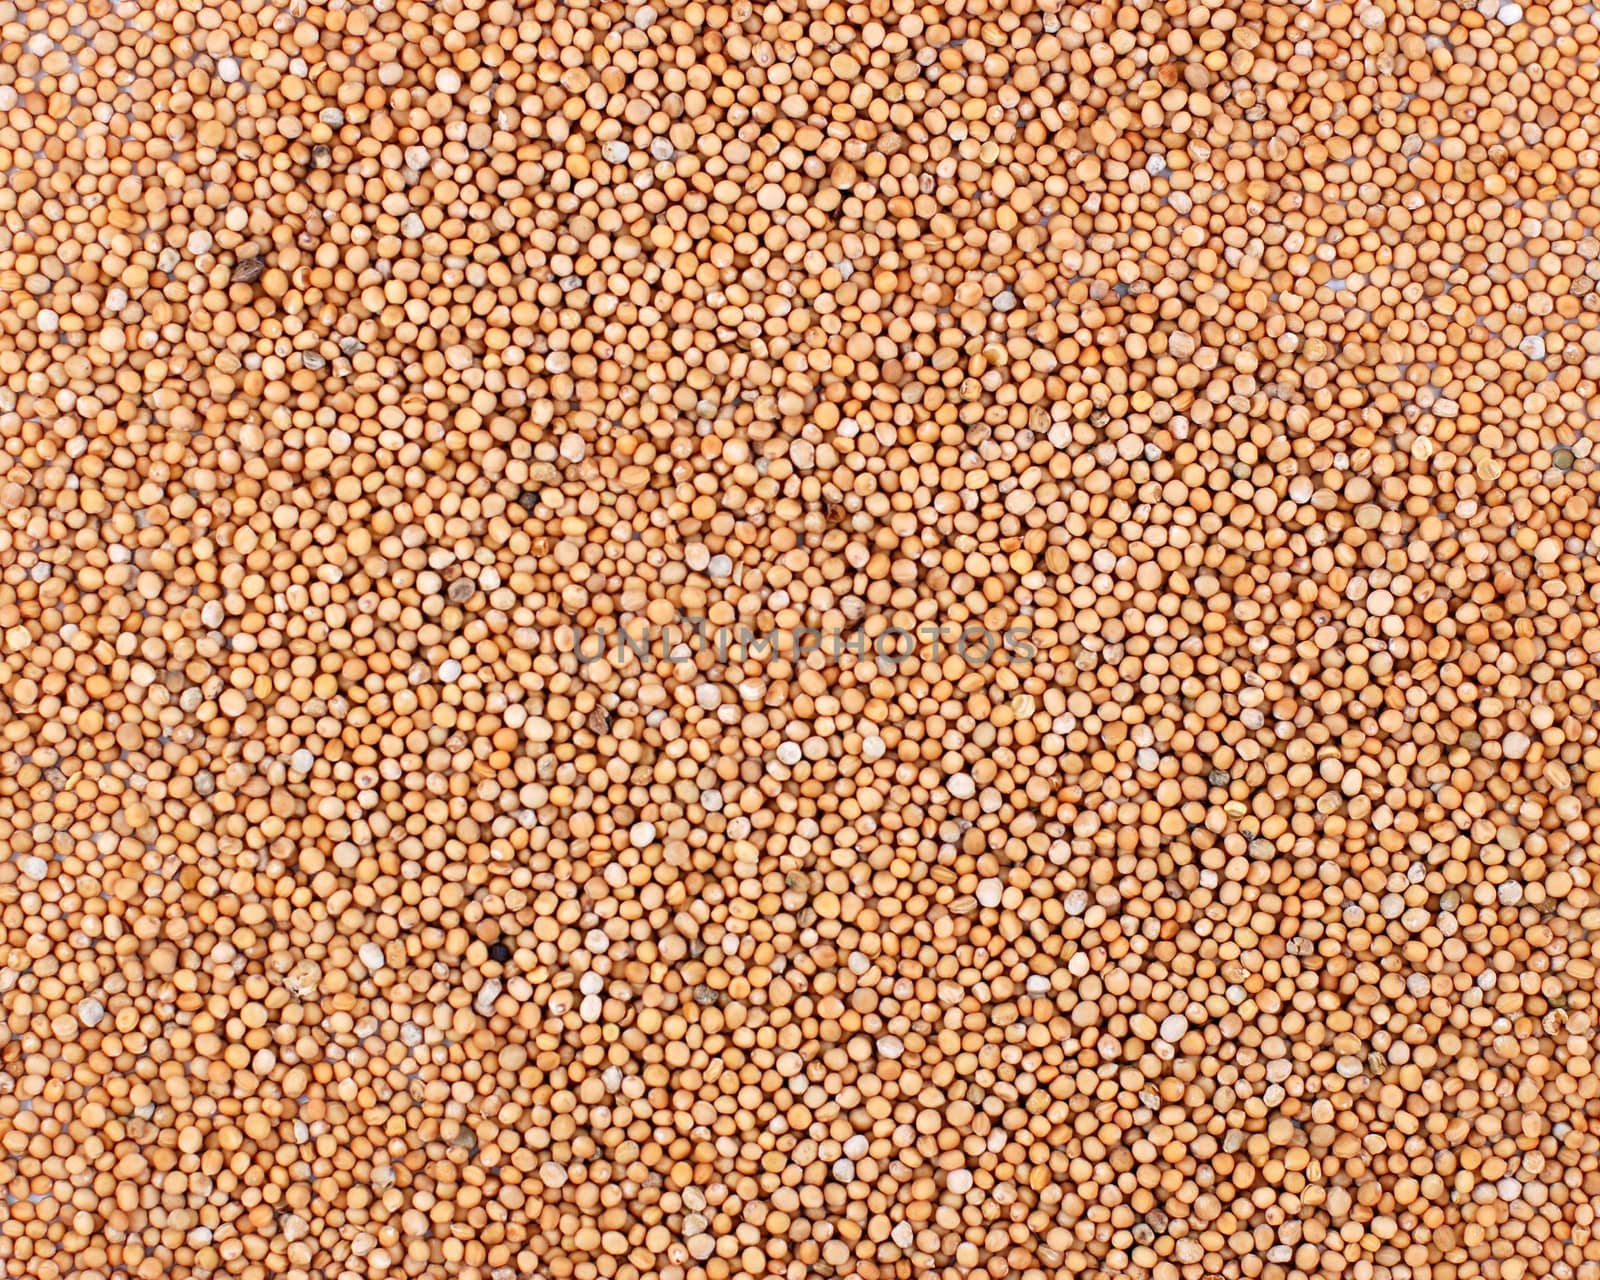 Mustard seeds abstract background texture